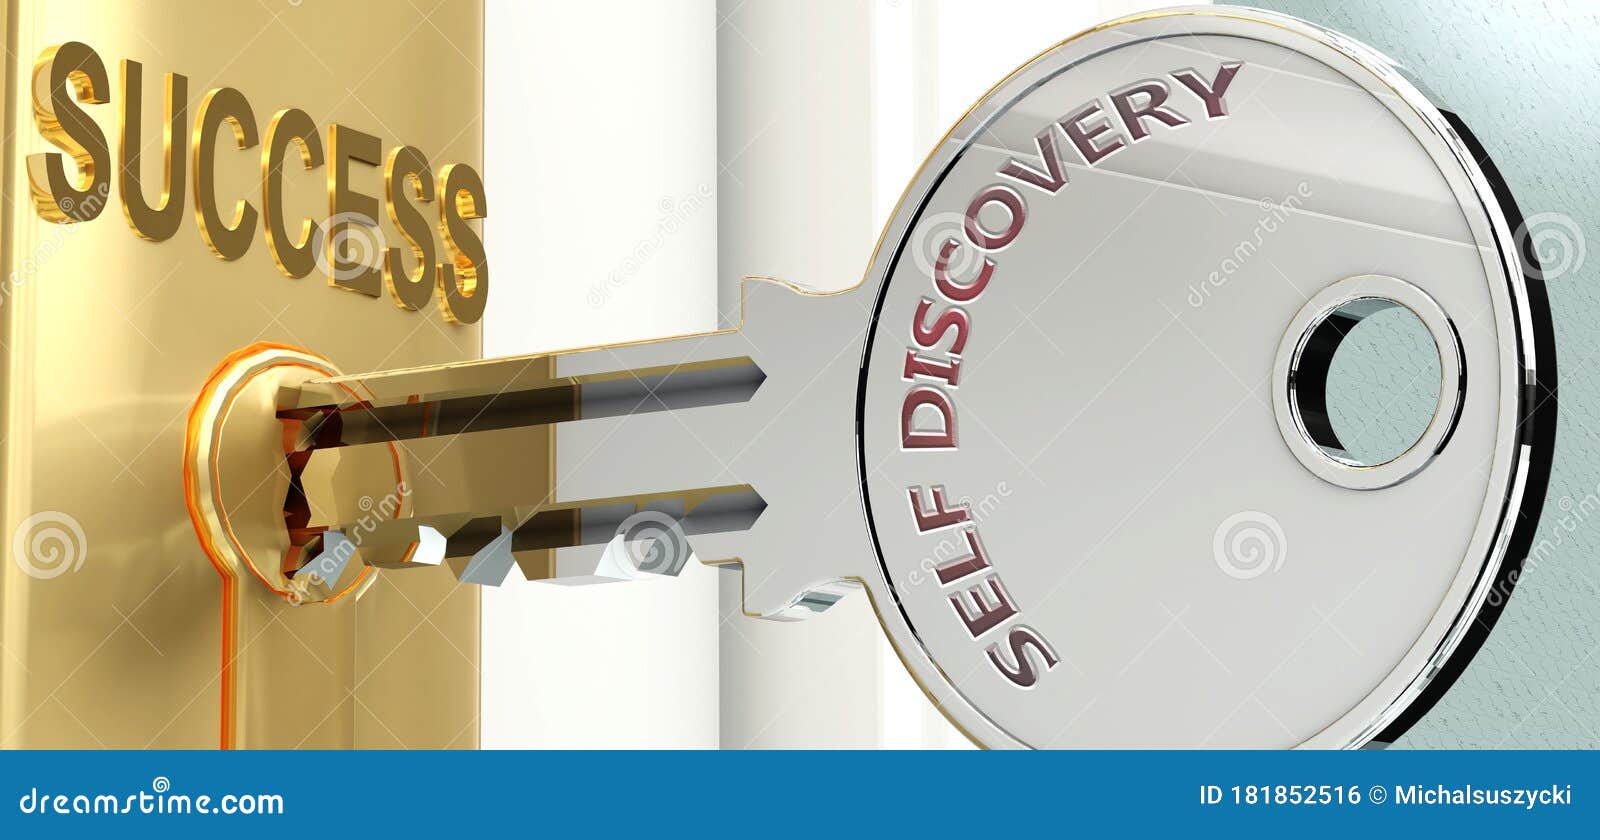 self discovery and success - pictured as word self discovery on a key, to ize that self discovery helps achieving success